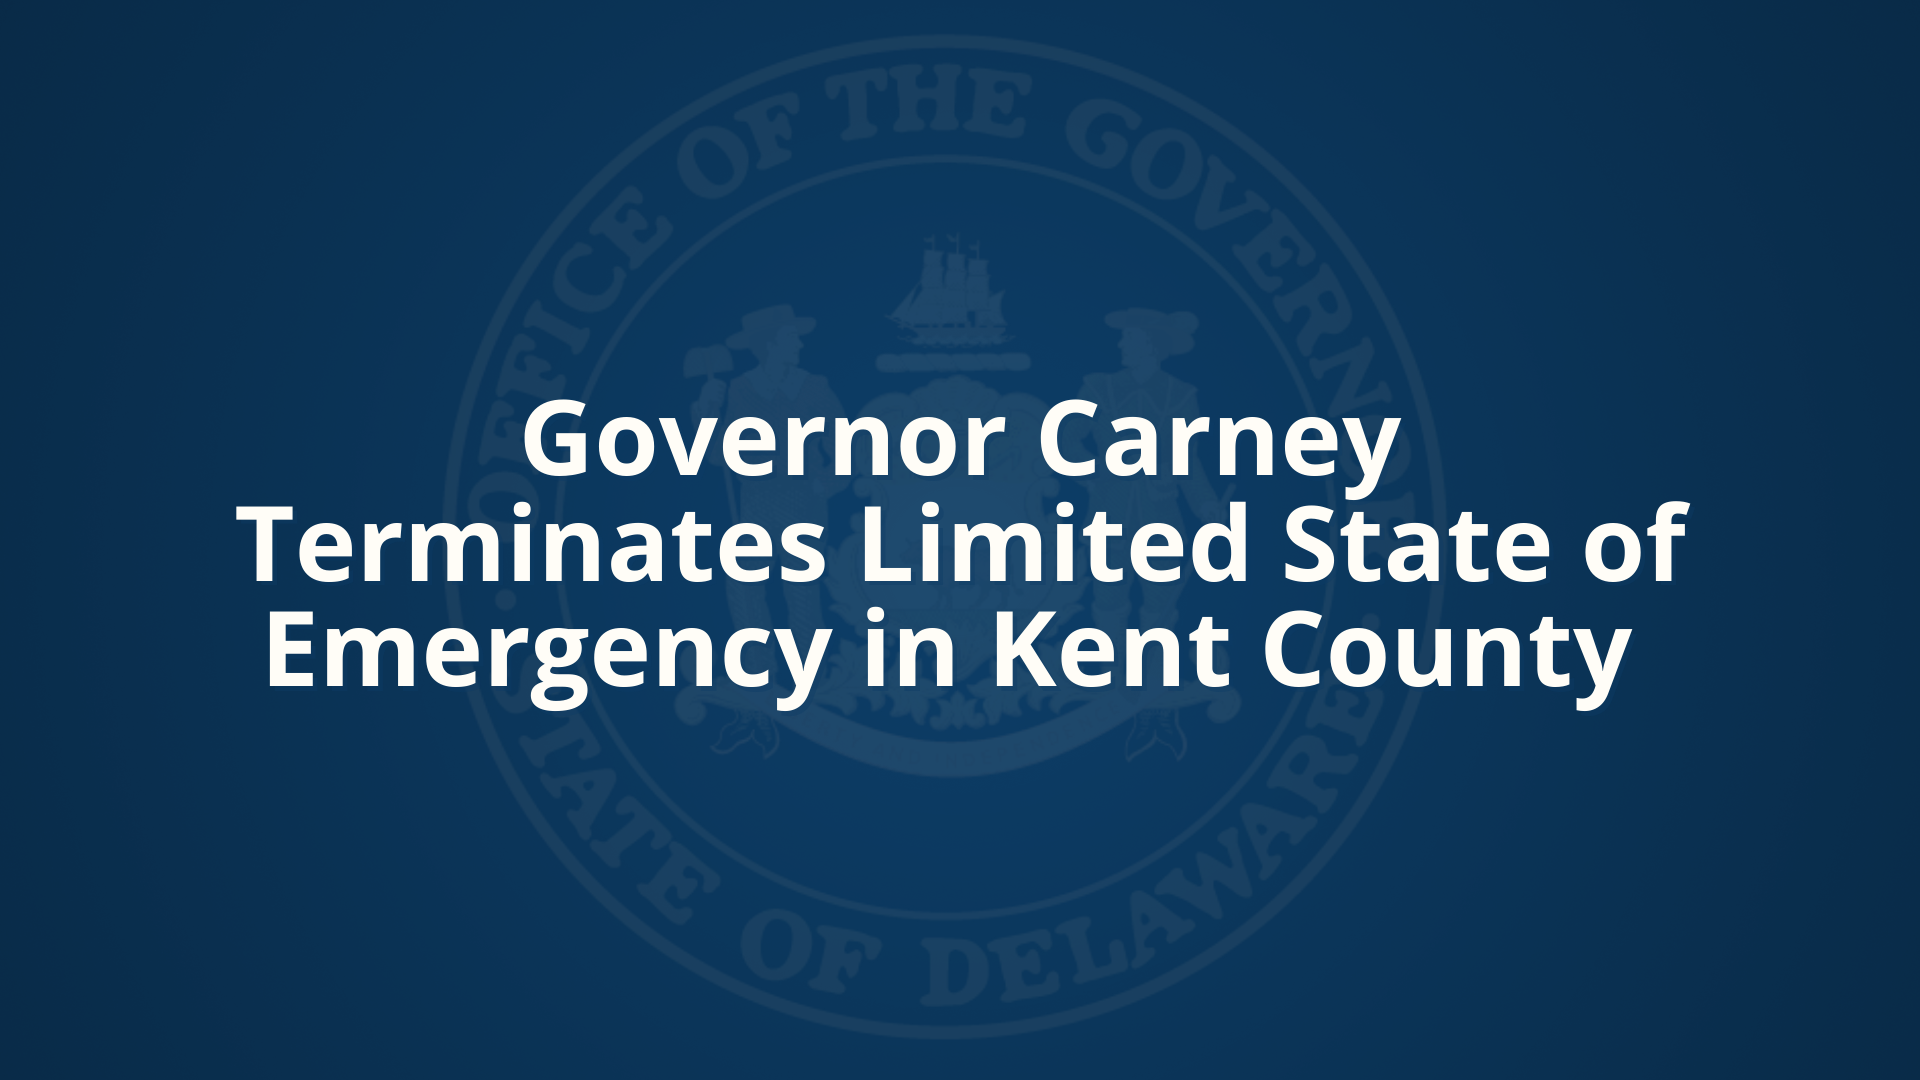 Governor Carney Terminates Limited State of Emergency in Kent County